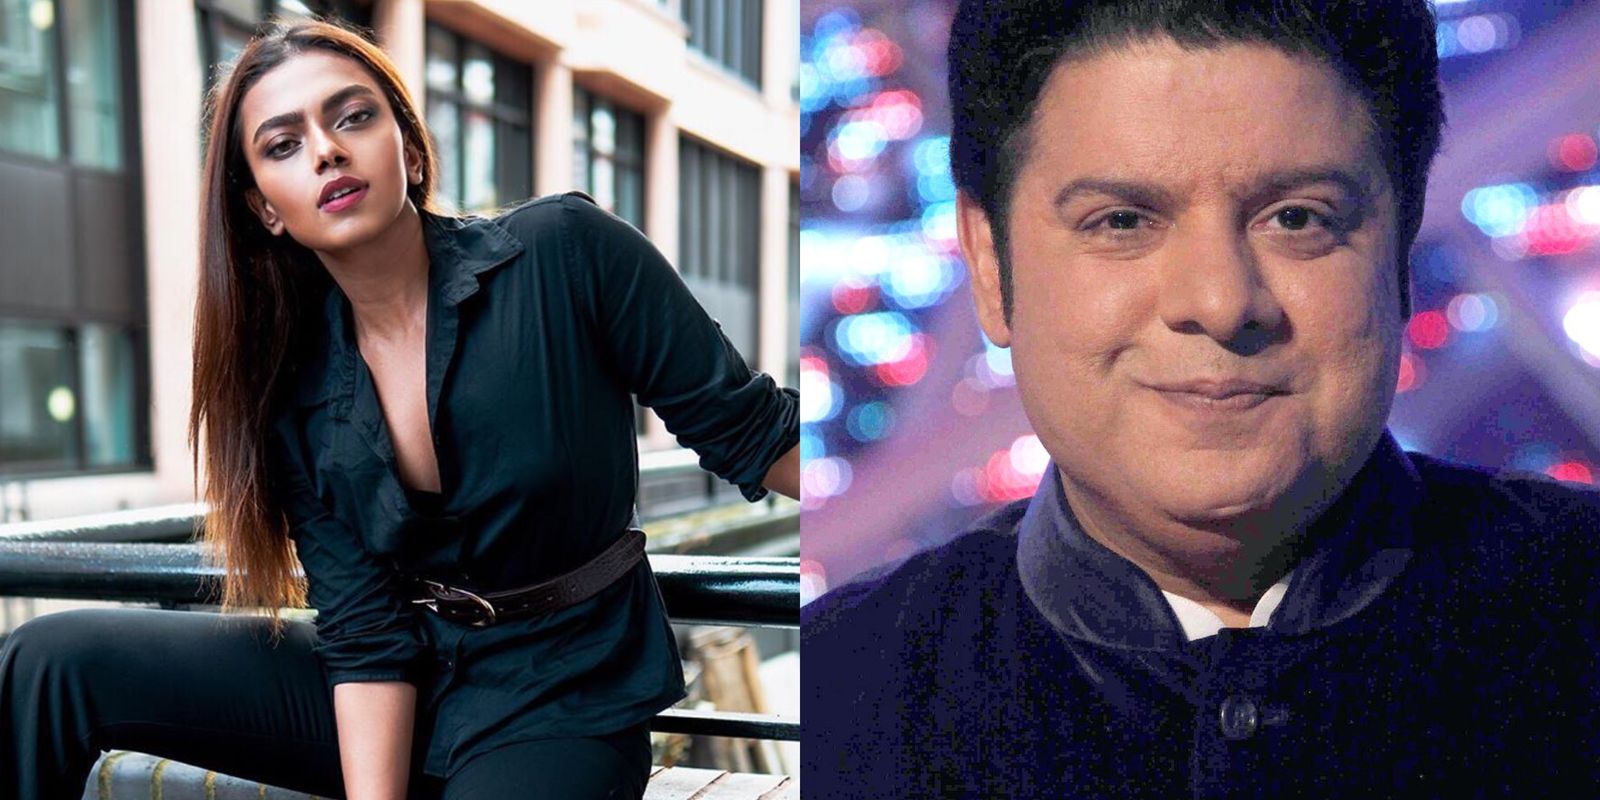 Actor & Model Paula Claims Sajid Khan Asked Her To Strip For A Role In Housefull When She Was Still A Minor In A #MeToo Post